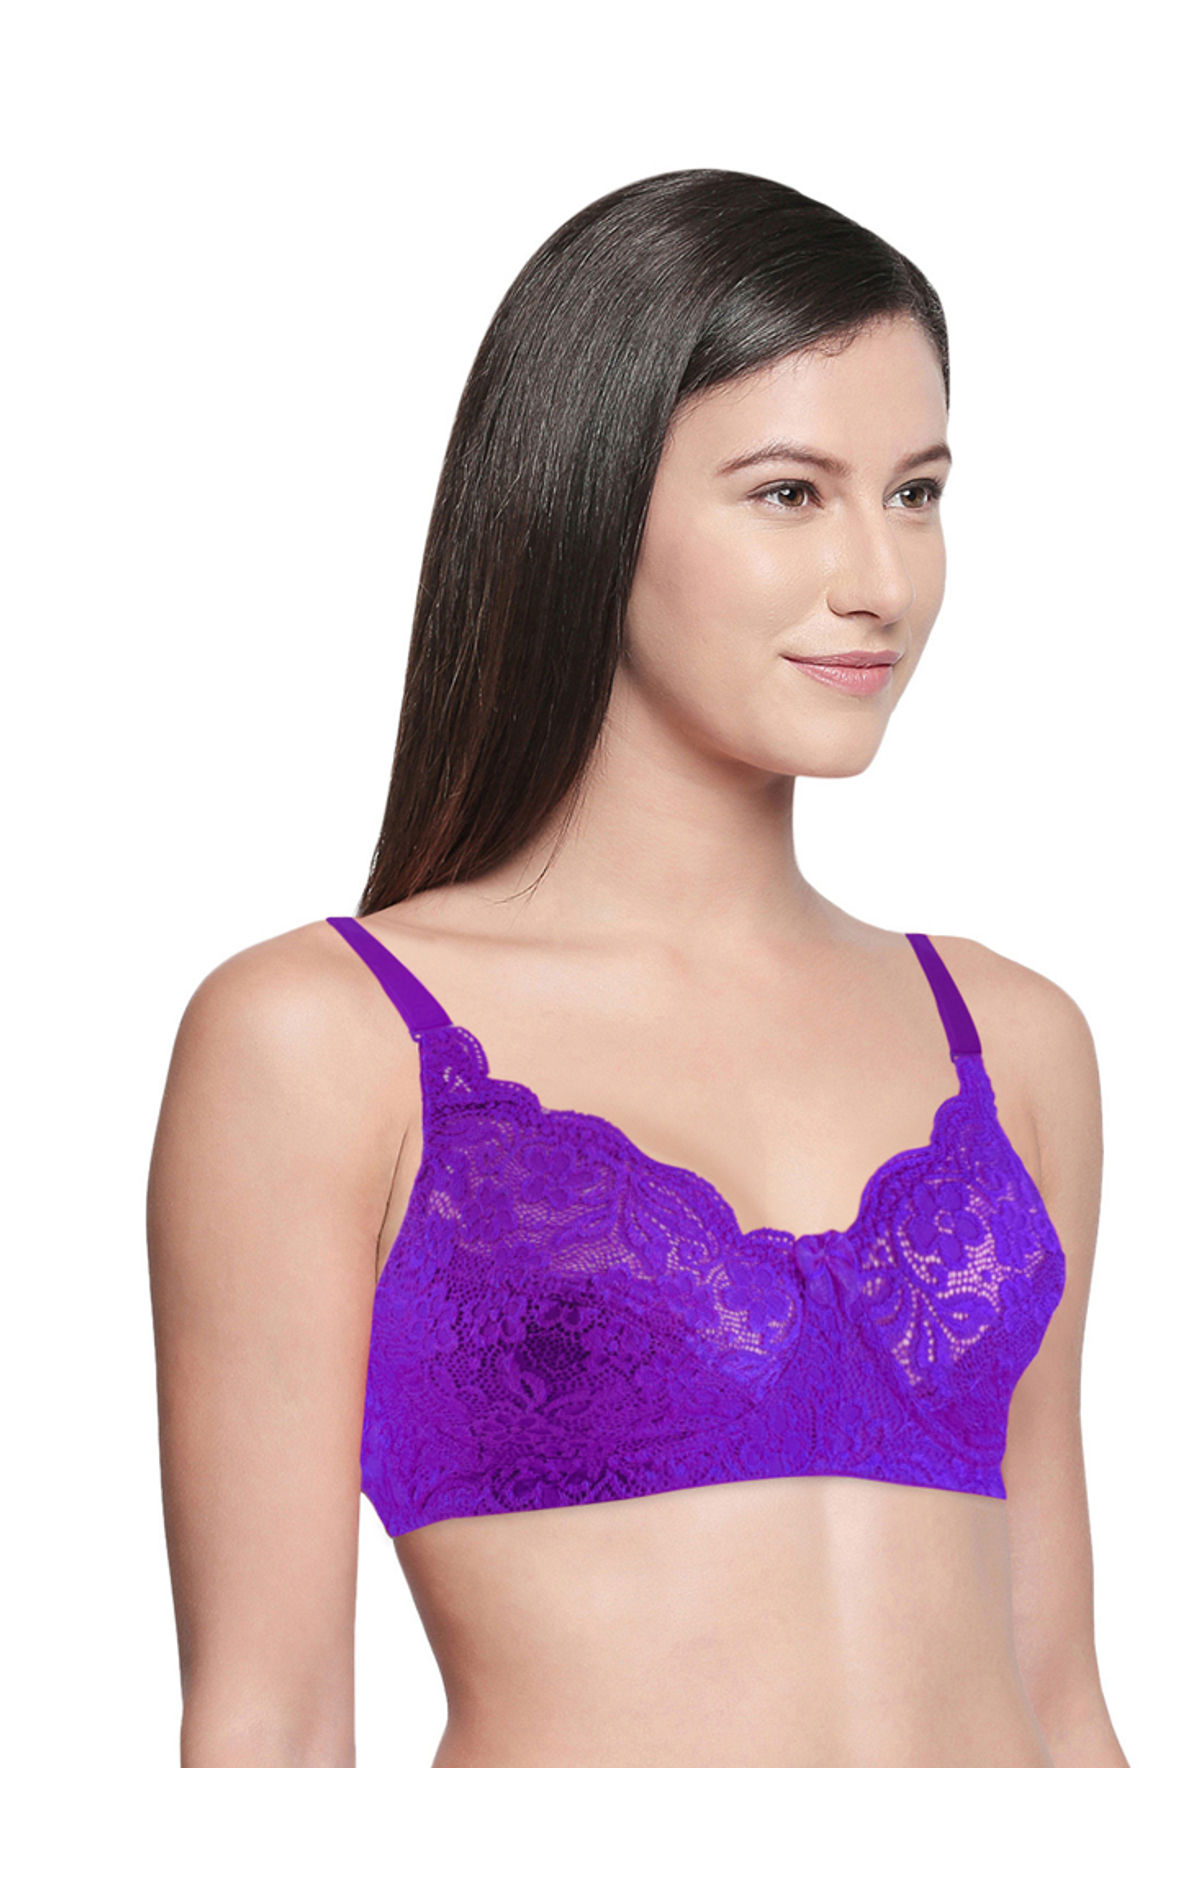 D Cup Bras in Sizes 28-58 D  Underwire and Wire Free Bras